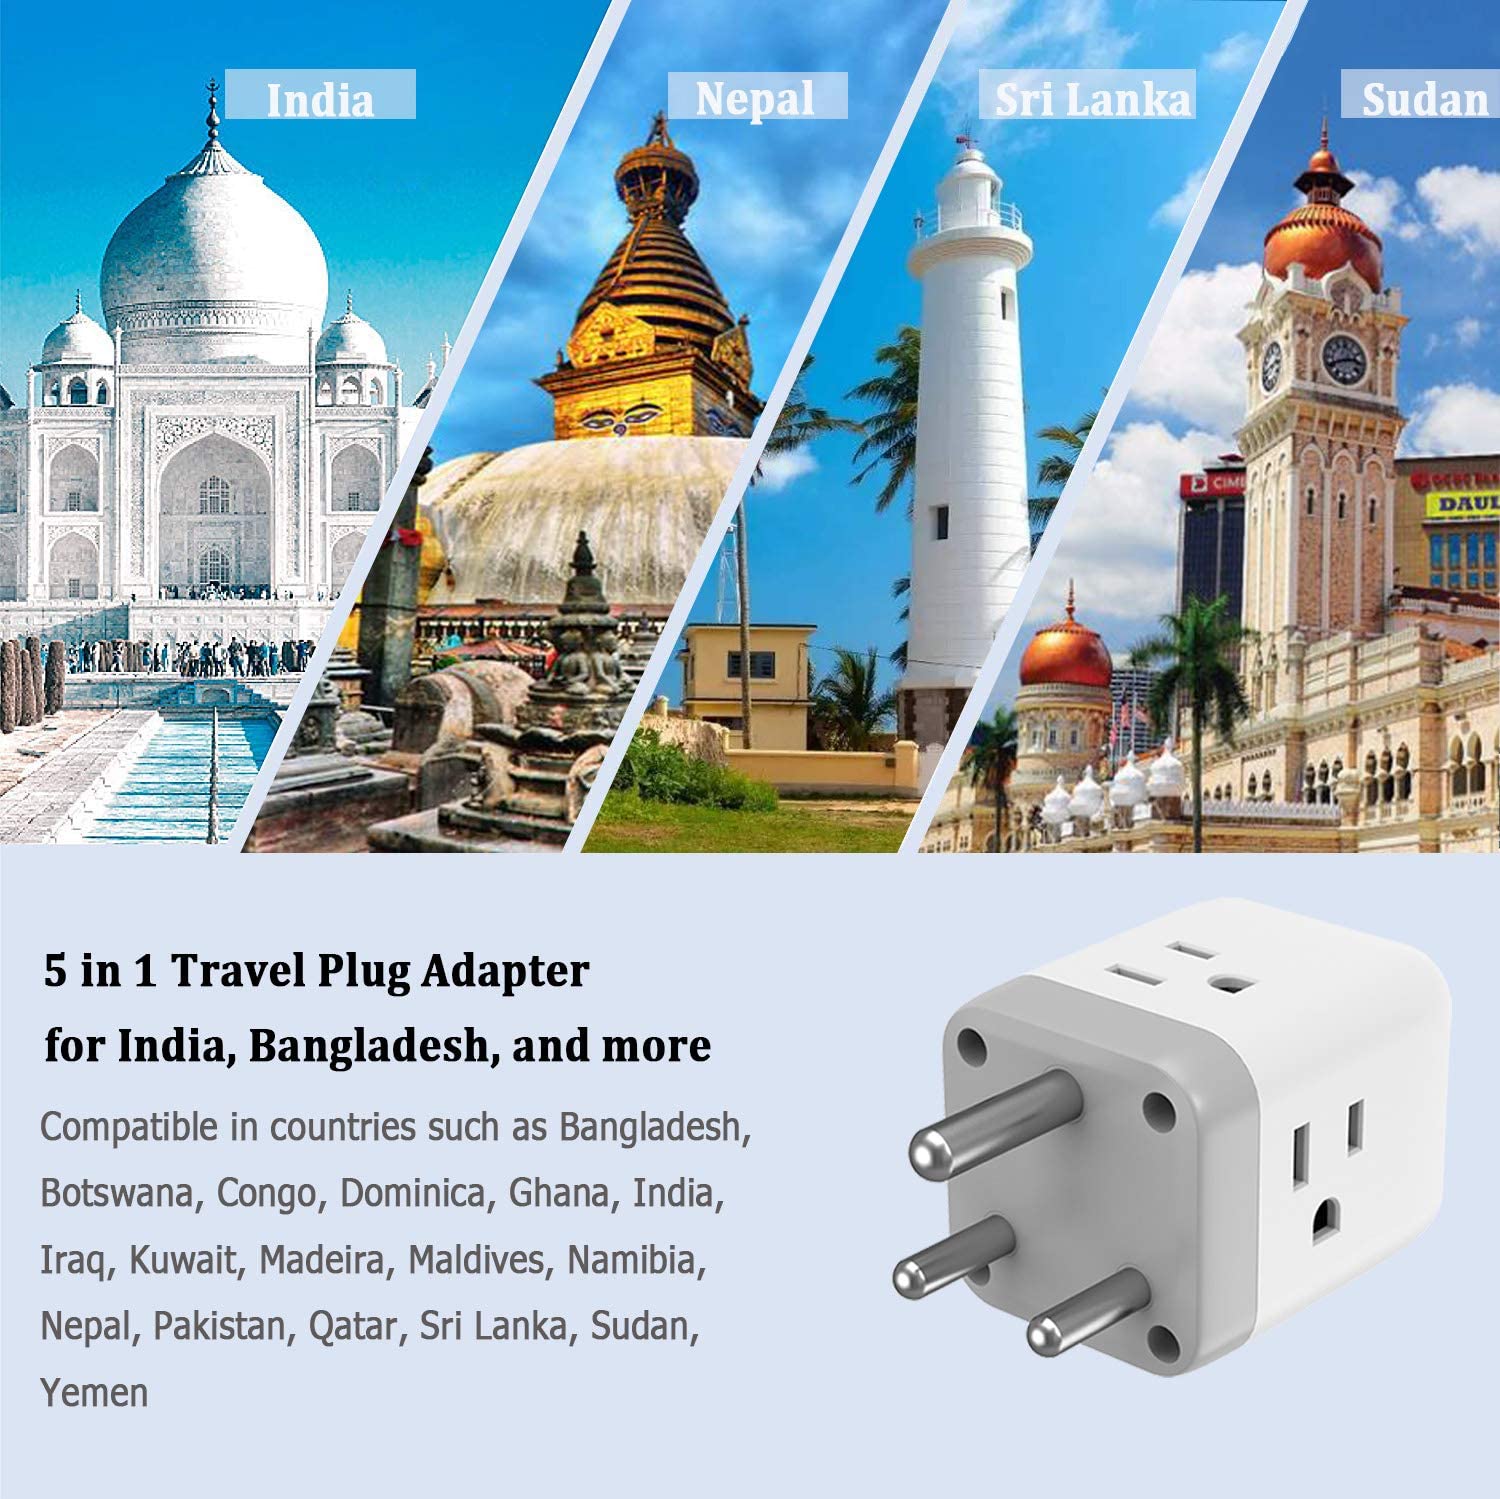 US To India/Nepal Travel Plug Adapter With 3 Outlets 2 USB Ports (Type D Plug)